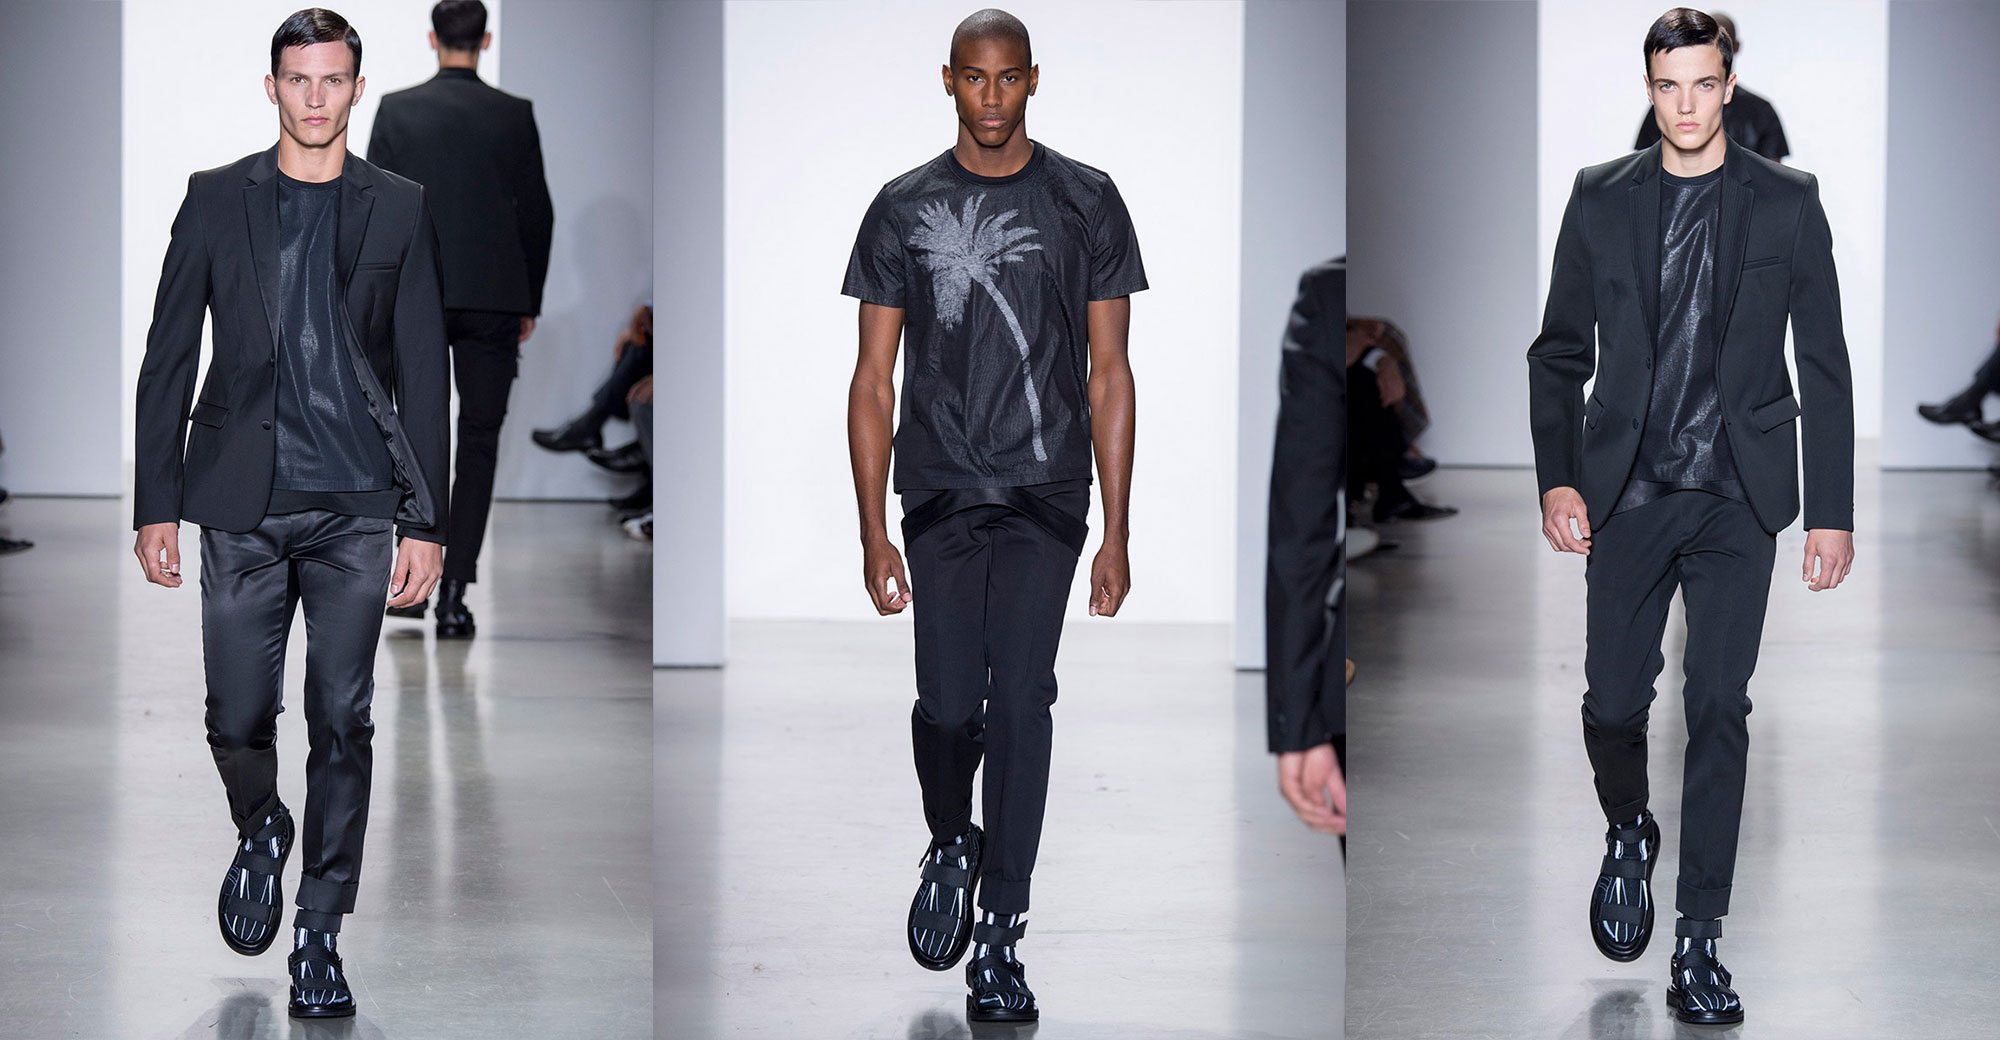 MEN'S FALL-WINTER 2016 SHOW: THE GUESTS - News